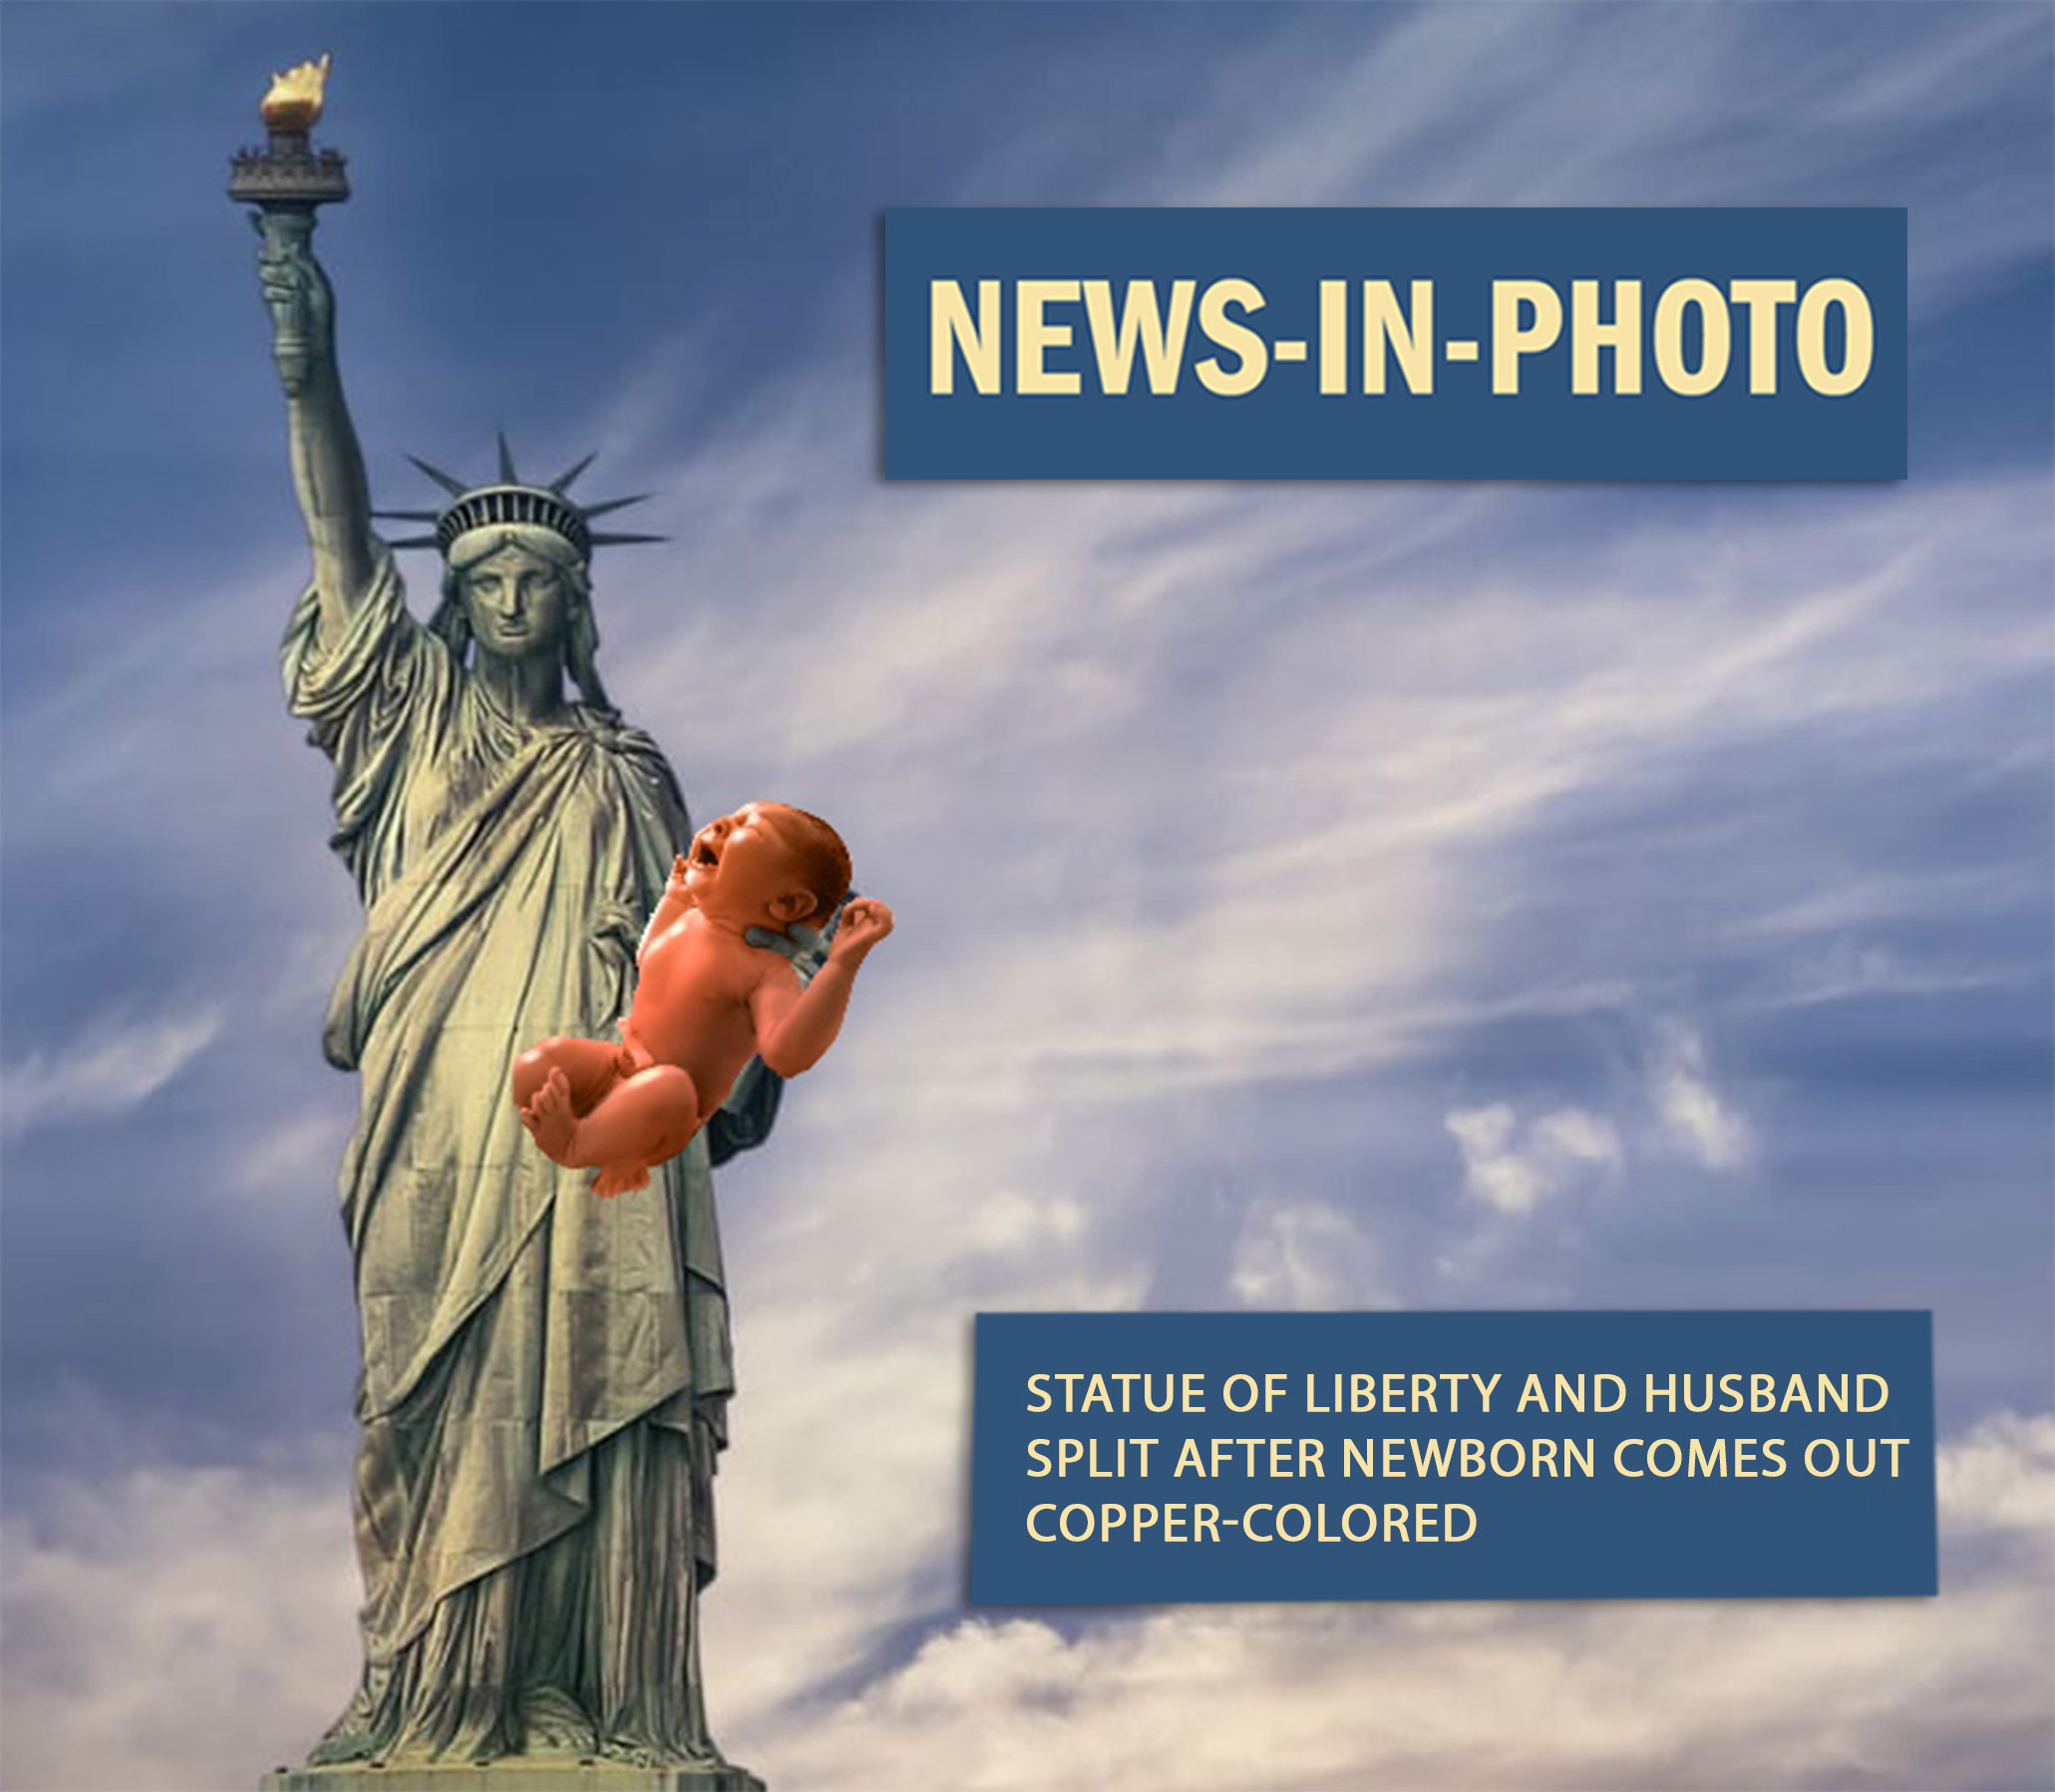 Statue Of Liberty And Husband Split After Newborn Comes Out Copper-Colored